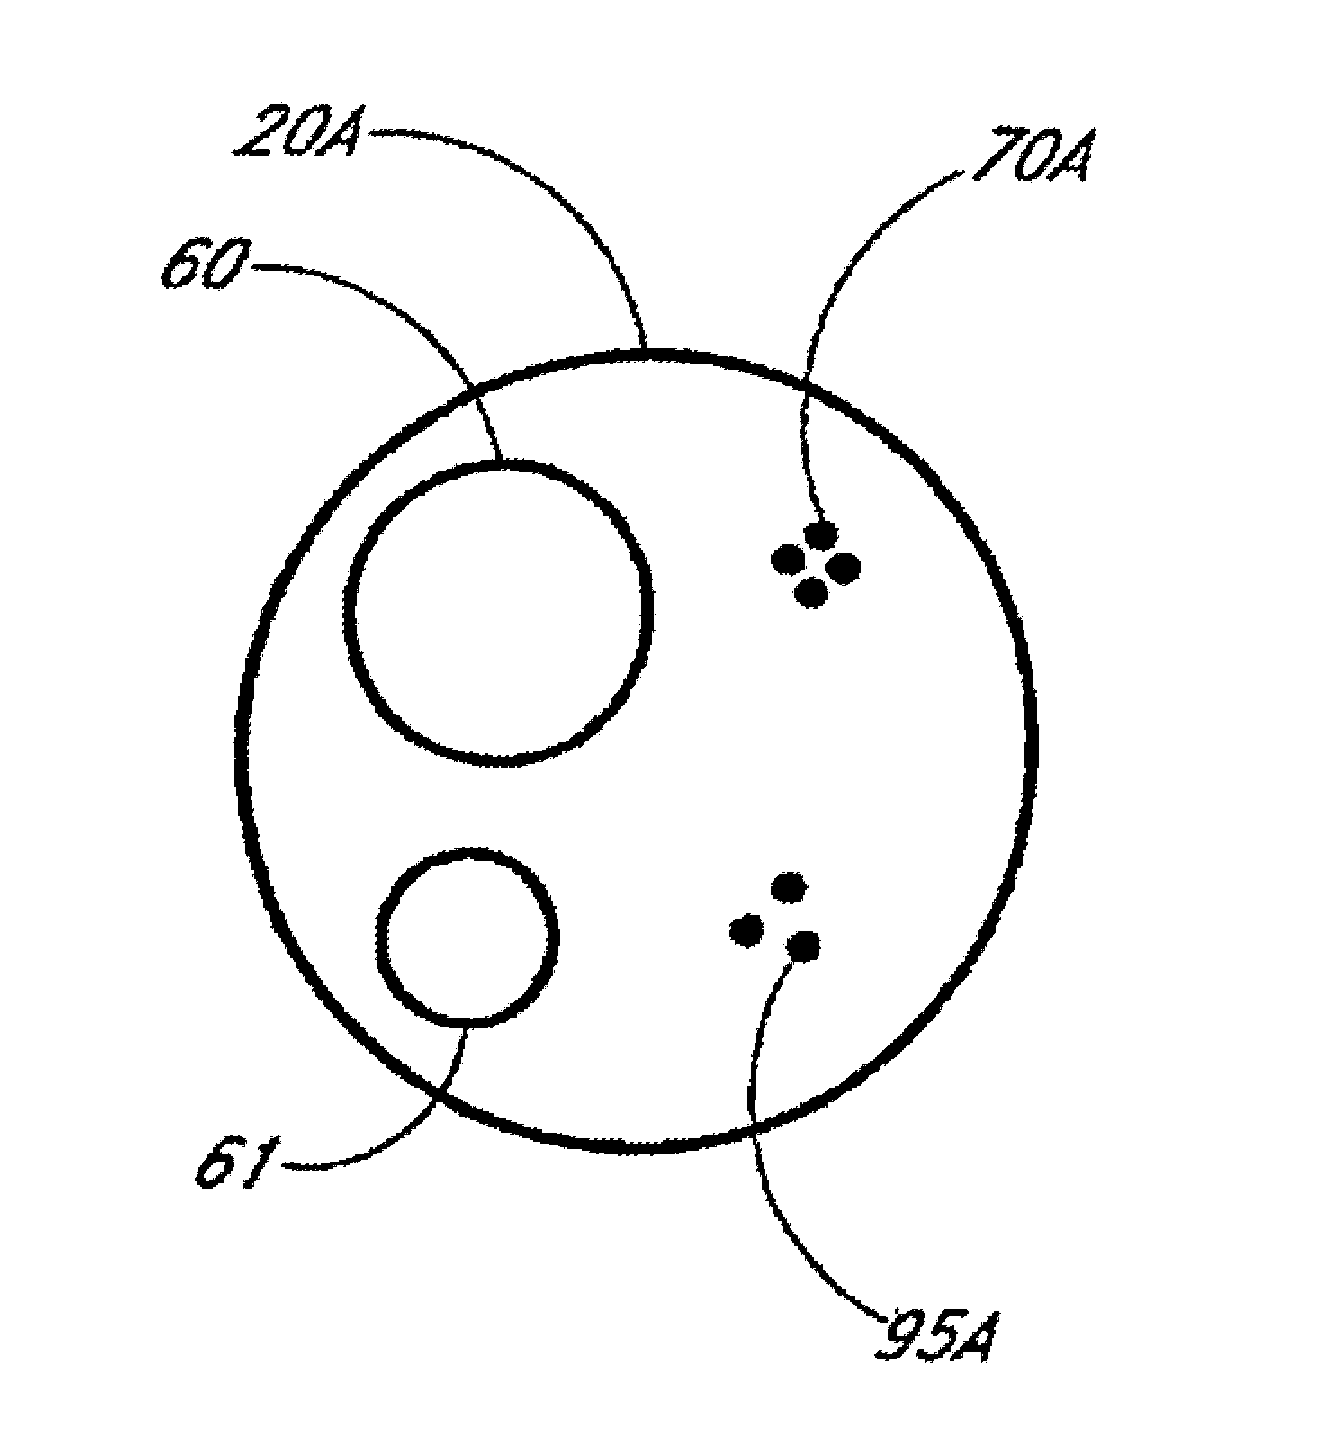 Systems and methods for determining vessel compliance